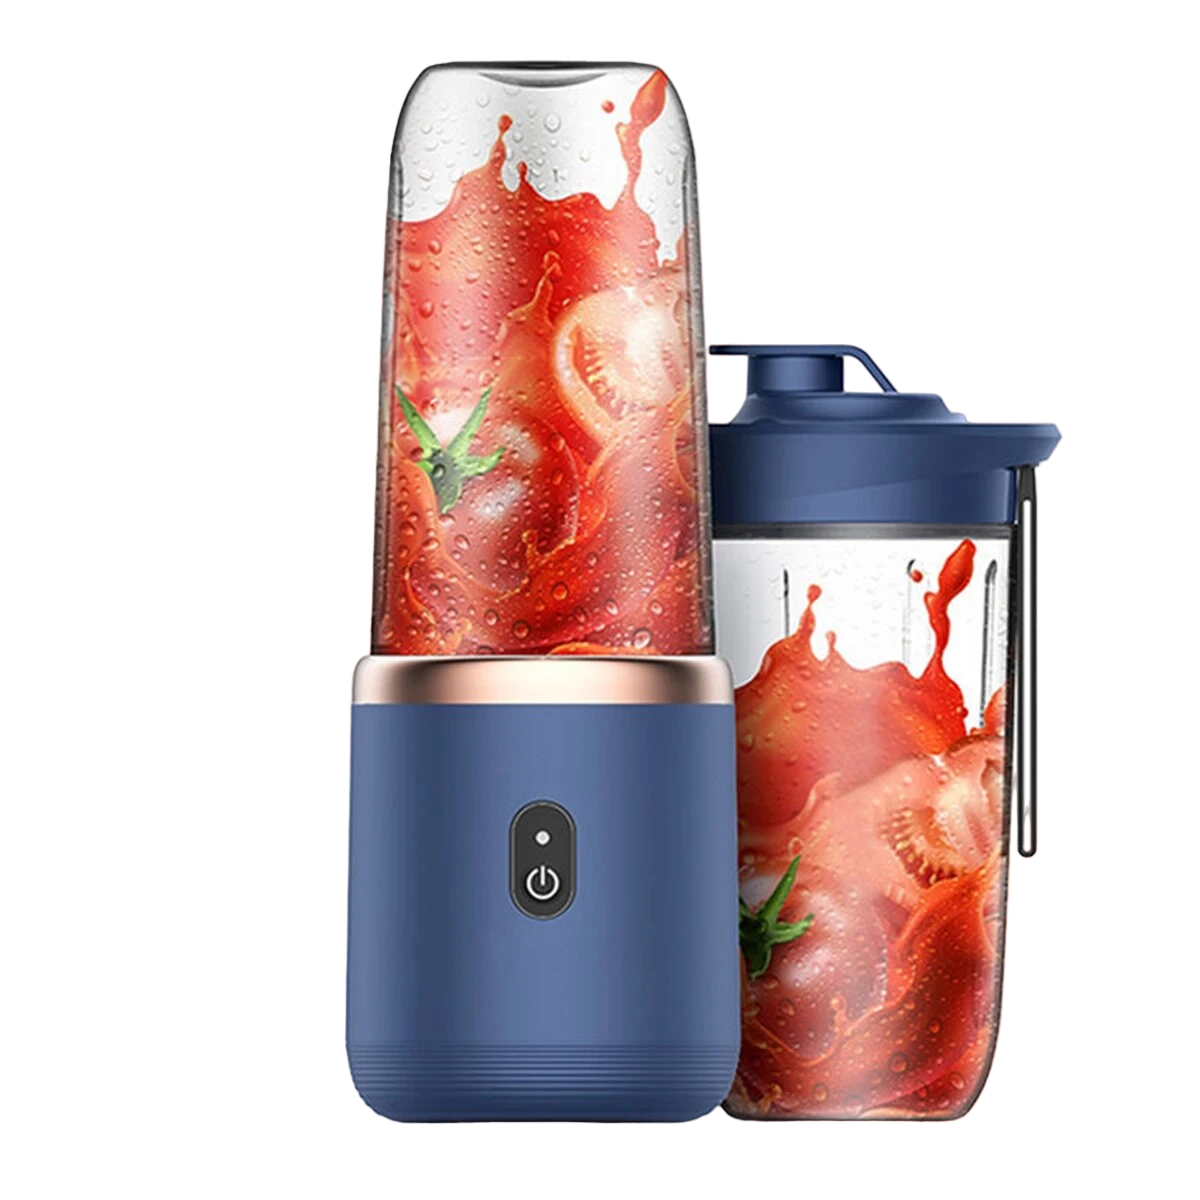 Portable Electric Blender Bottle | 6-Blade Multifunctional Juice and Smoothie Maker with Ice Crushing Capabilities